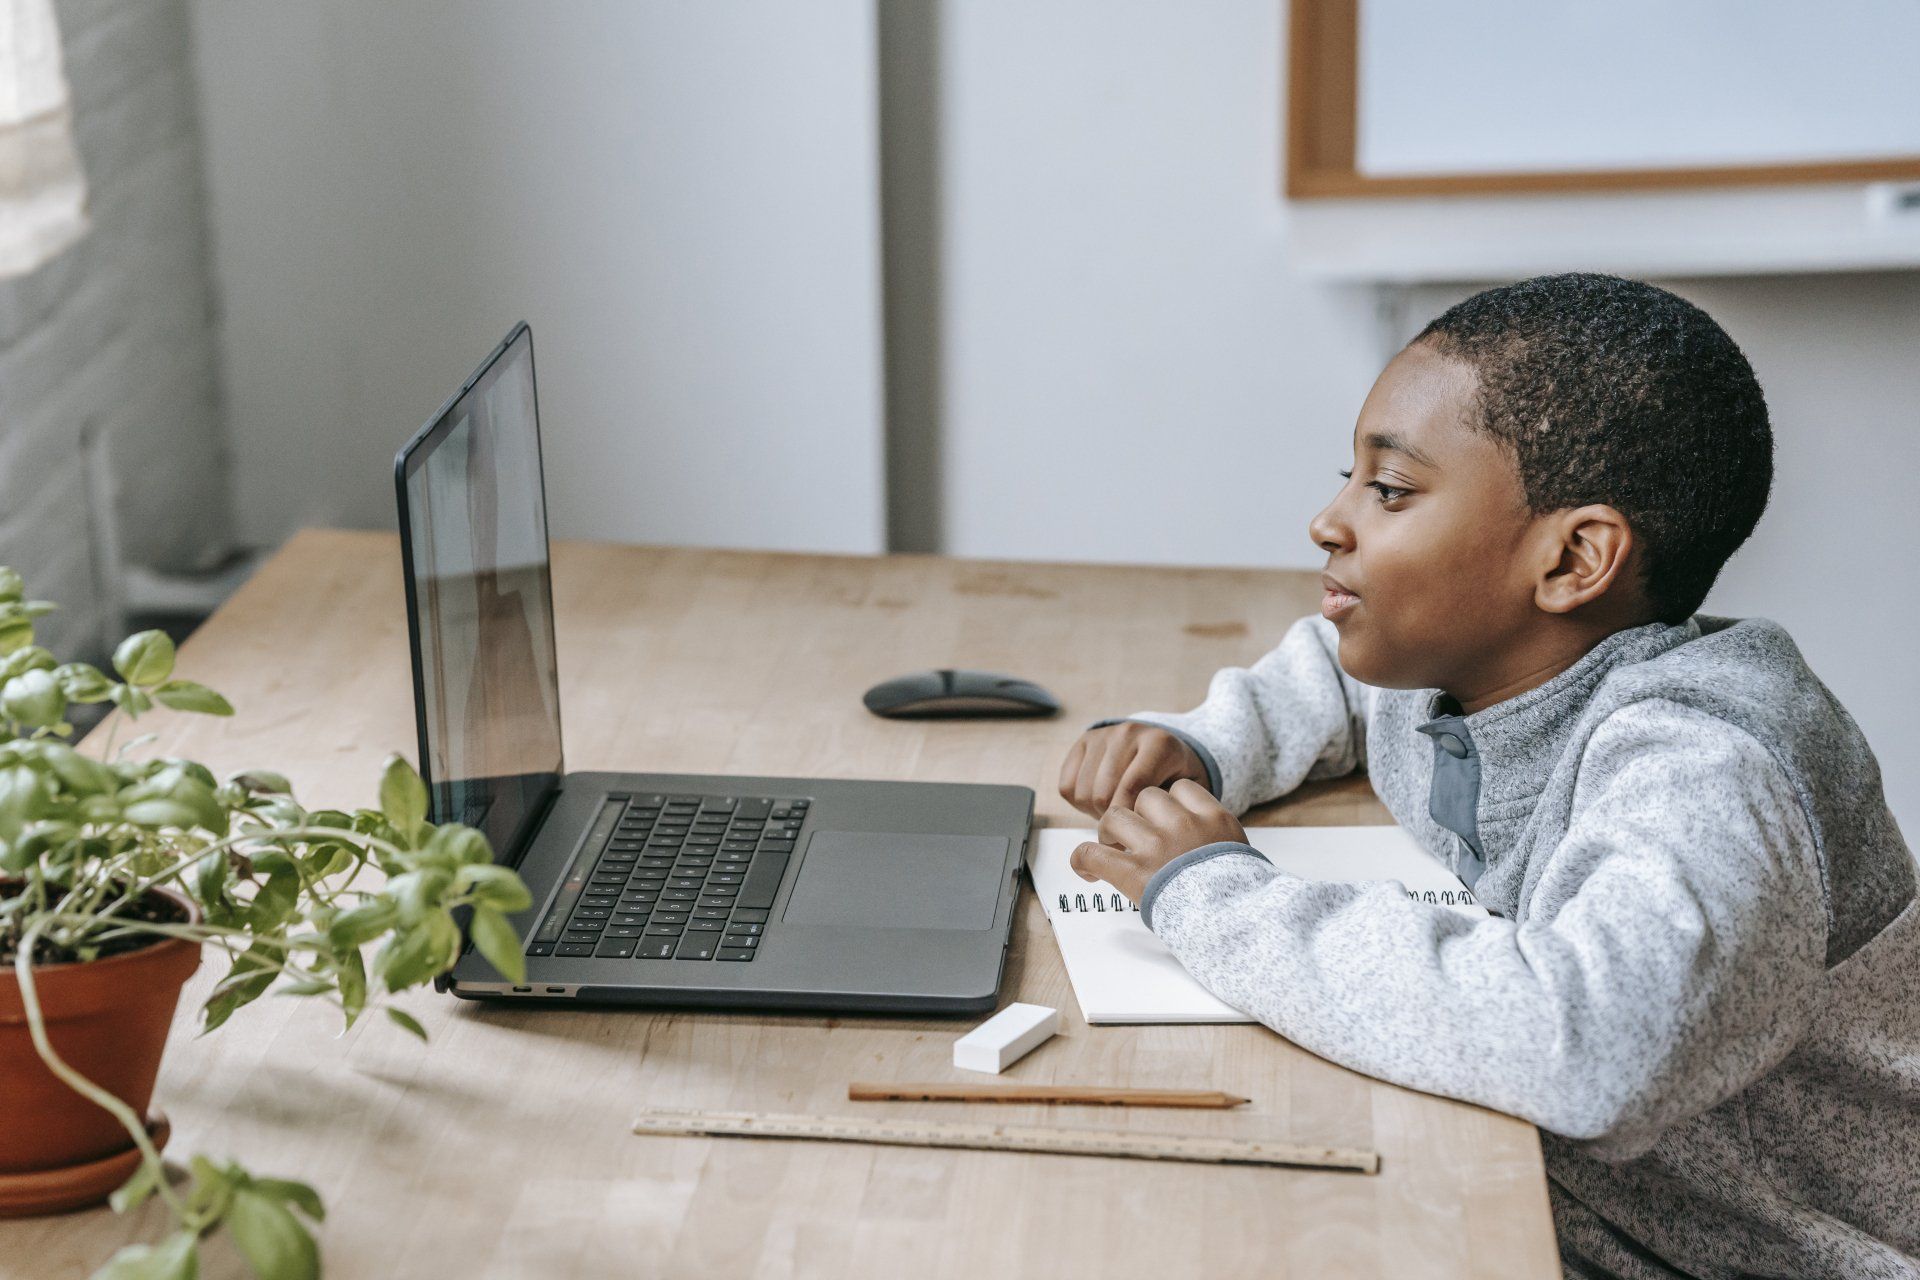 A young boy is sitting at a desk looking at a laptop computer.